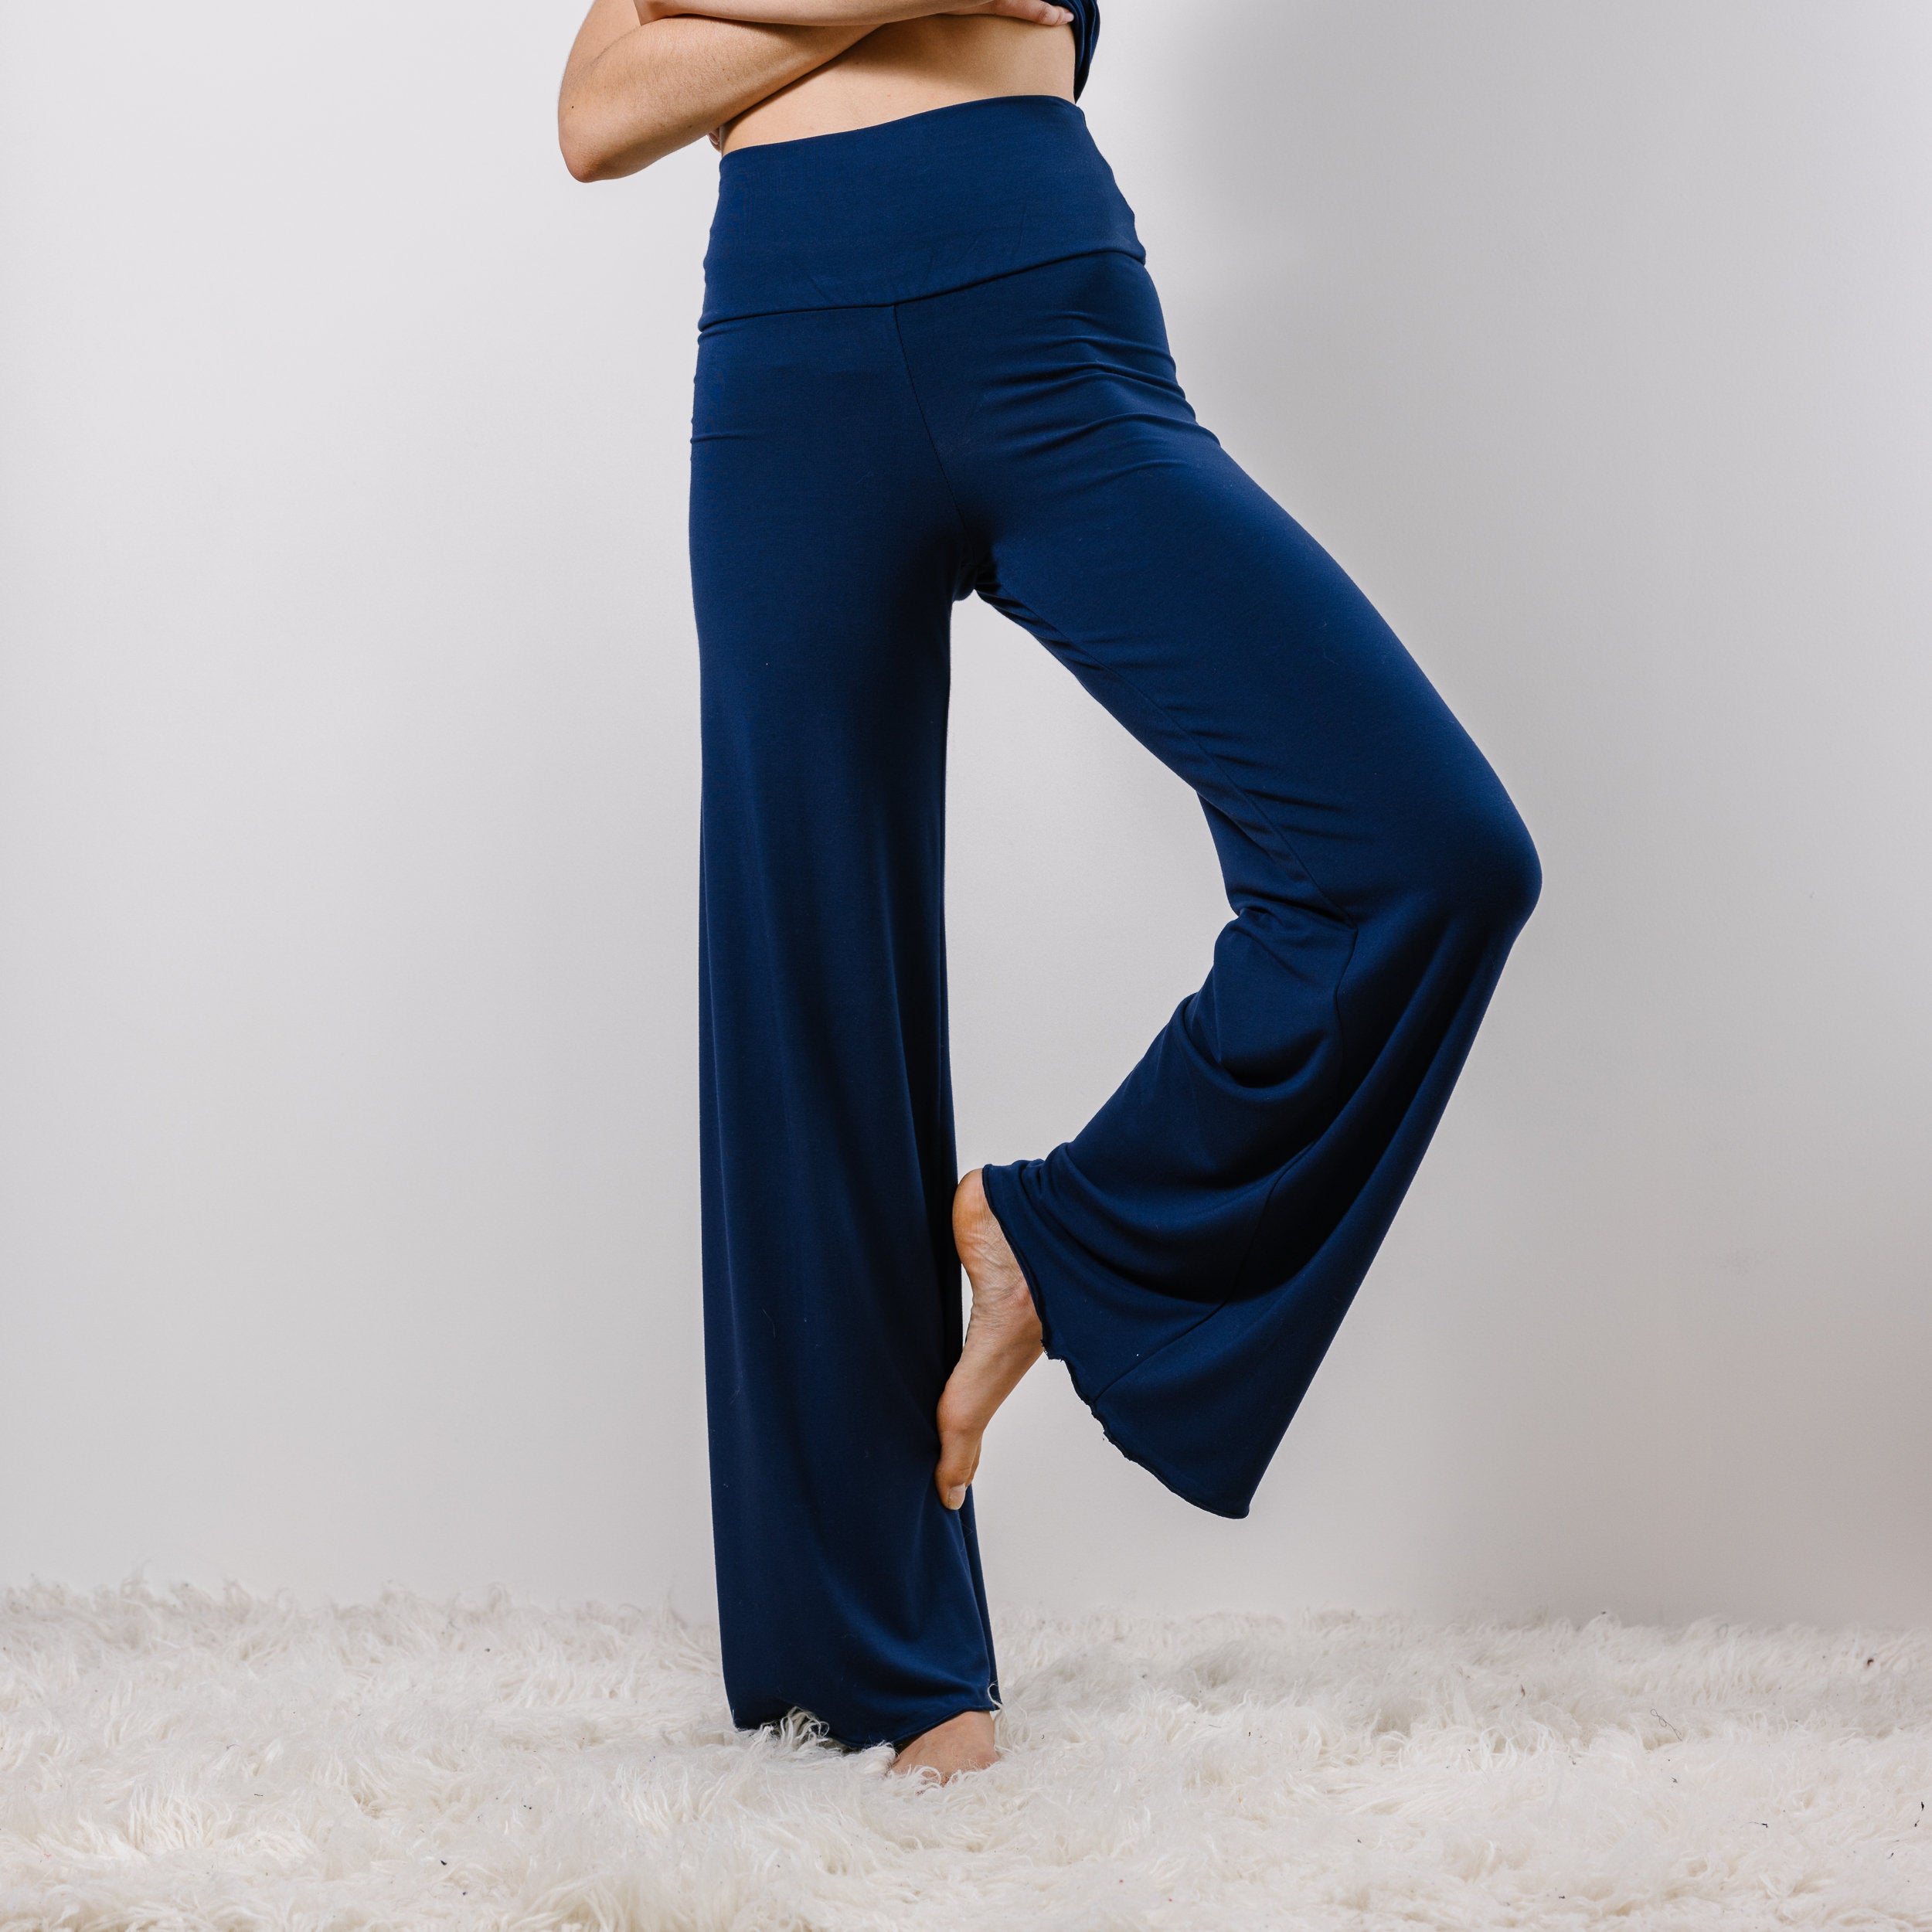 Wide Leg Pants With a High Waist in Tencel and Organic Cotton